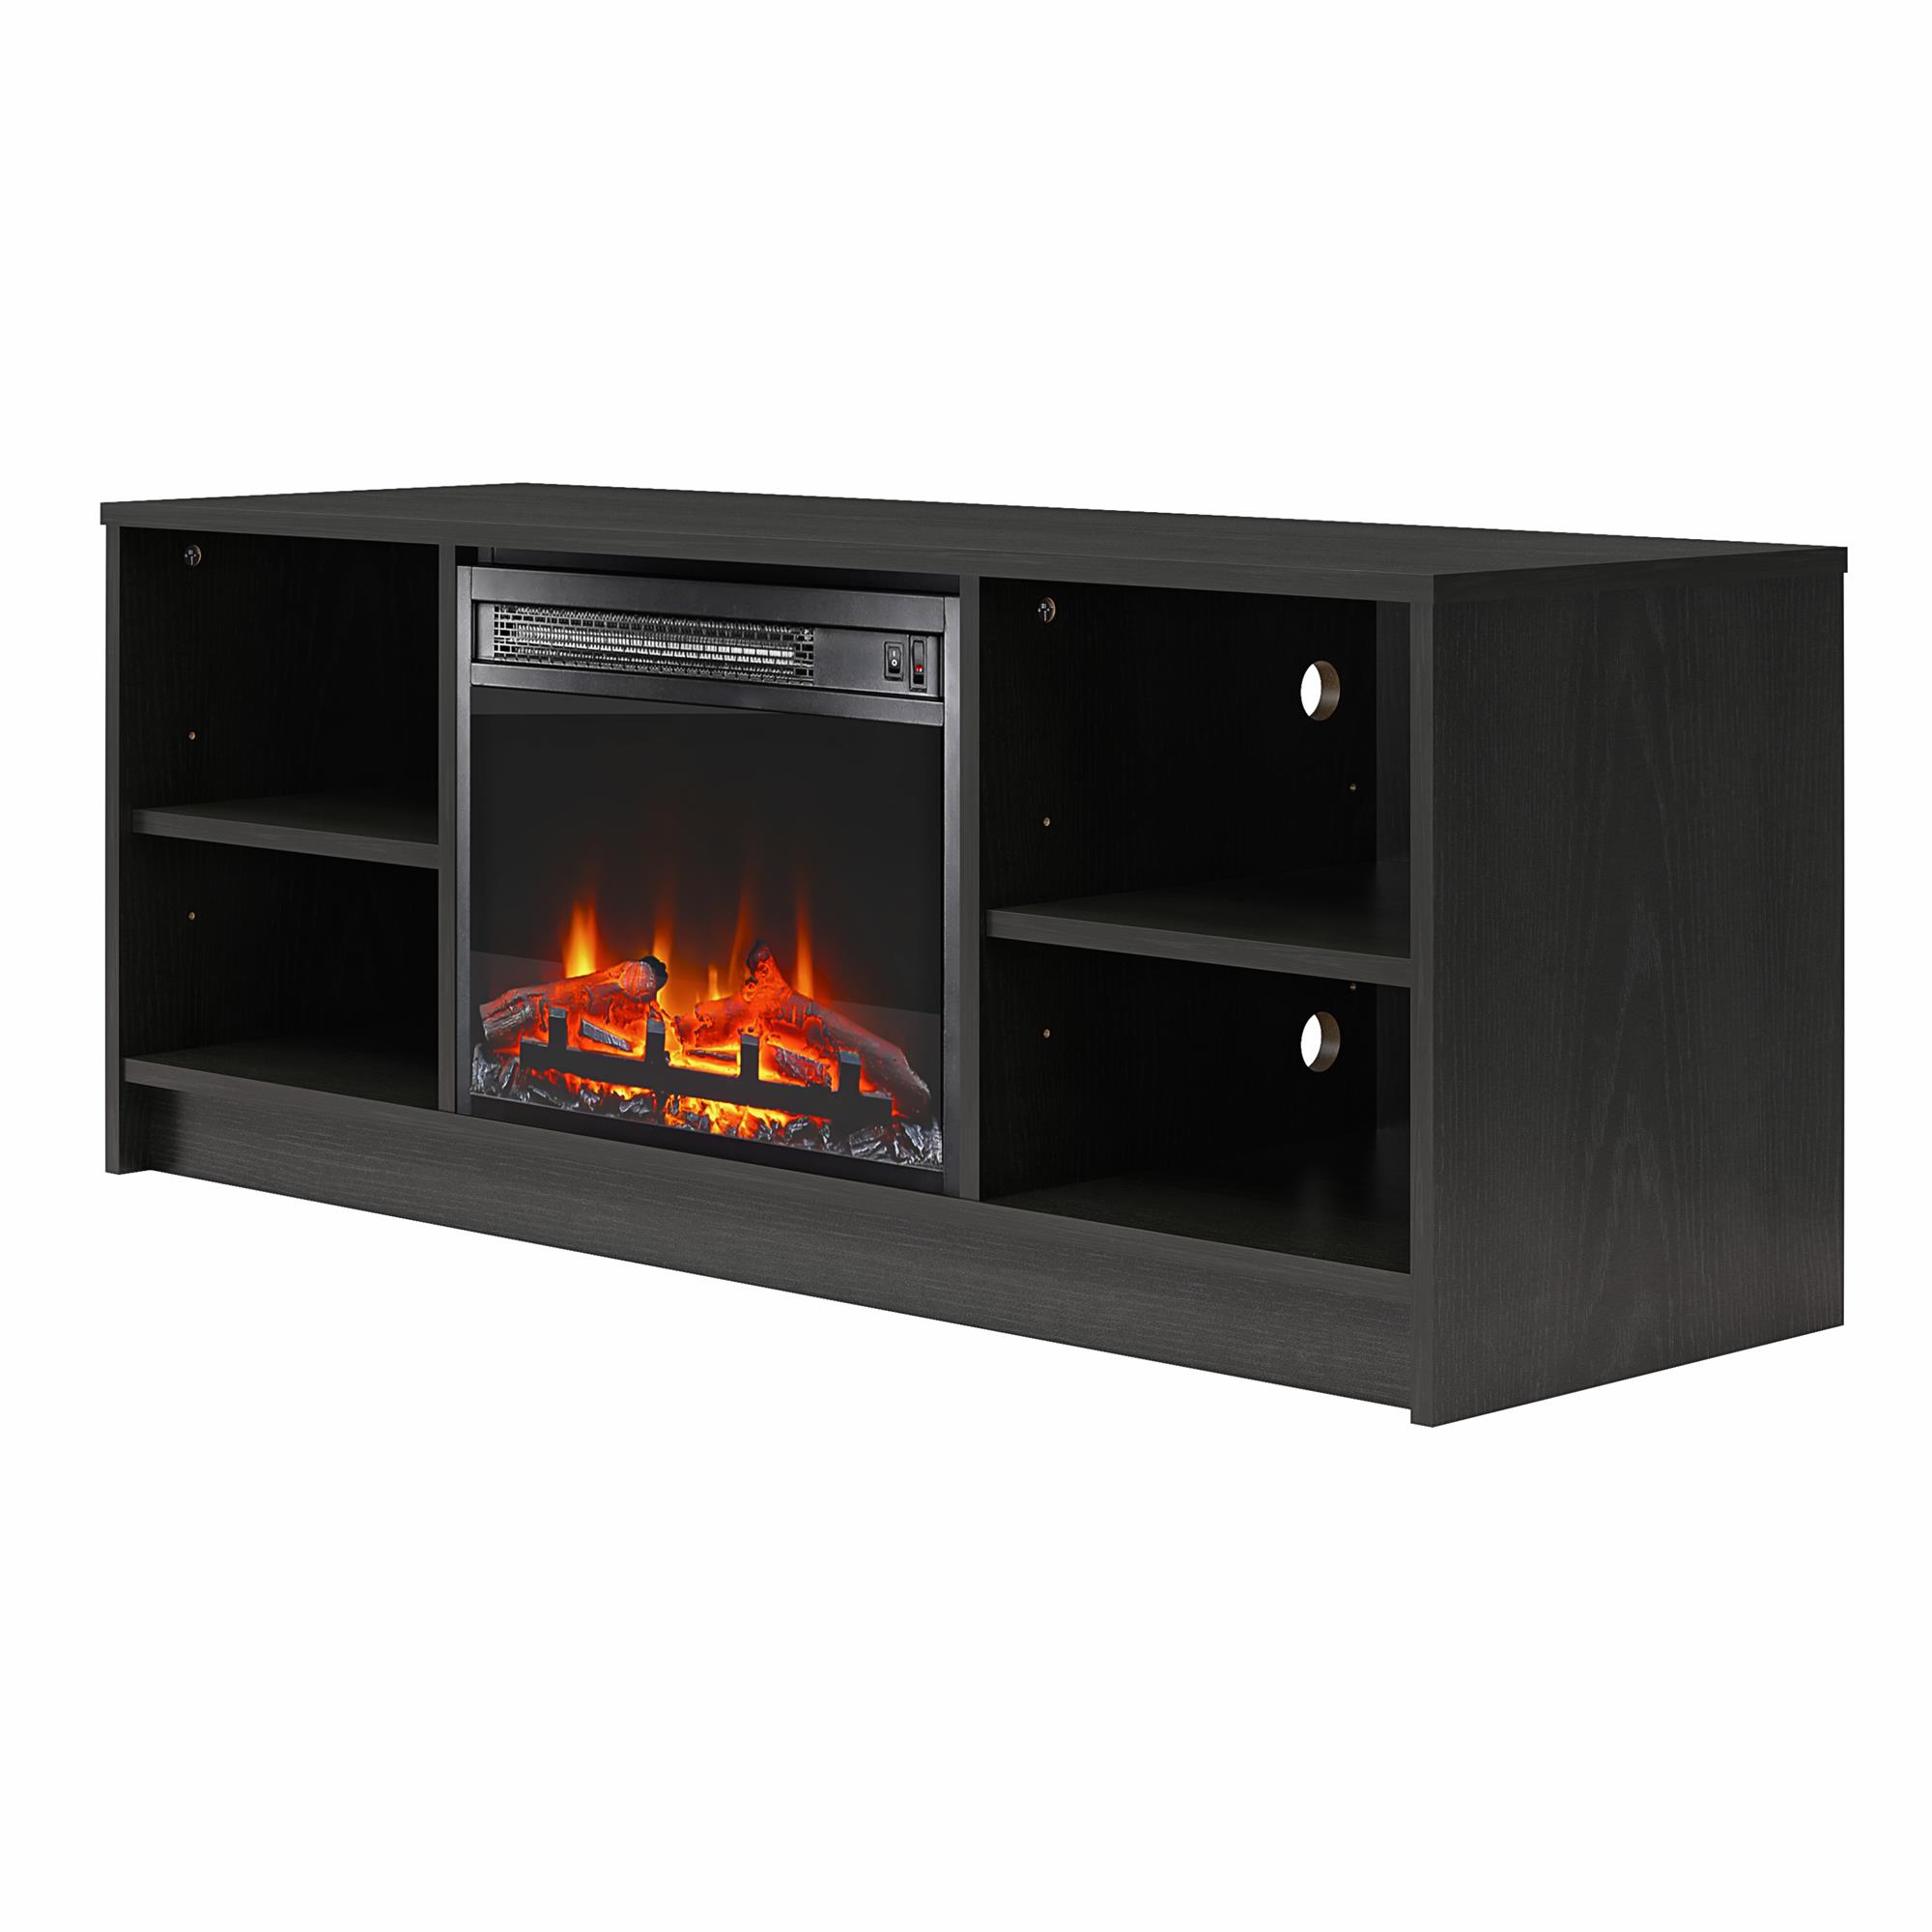 Mainstays Fireplace TV Stand, for TVs up to 55", Black Oak - image 5 of 12